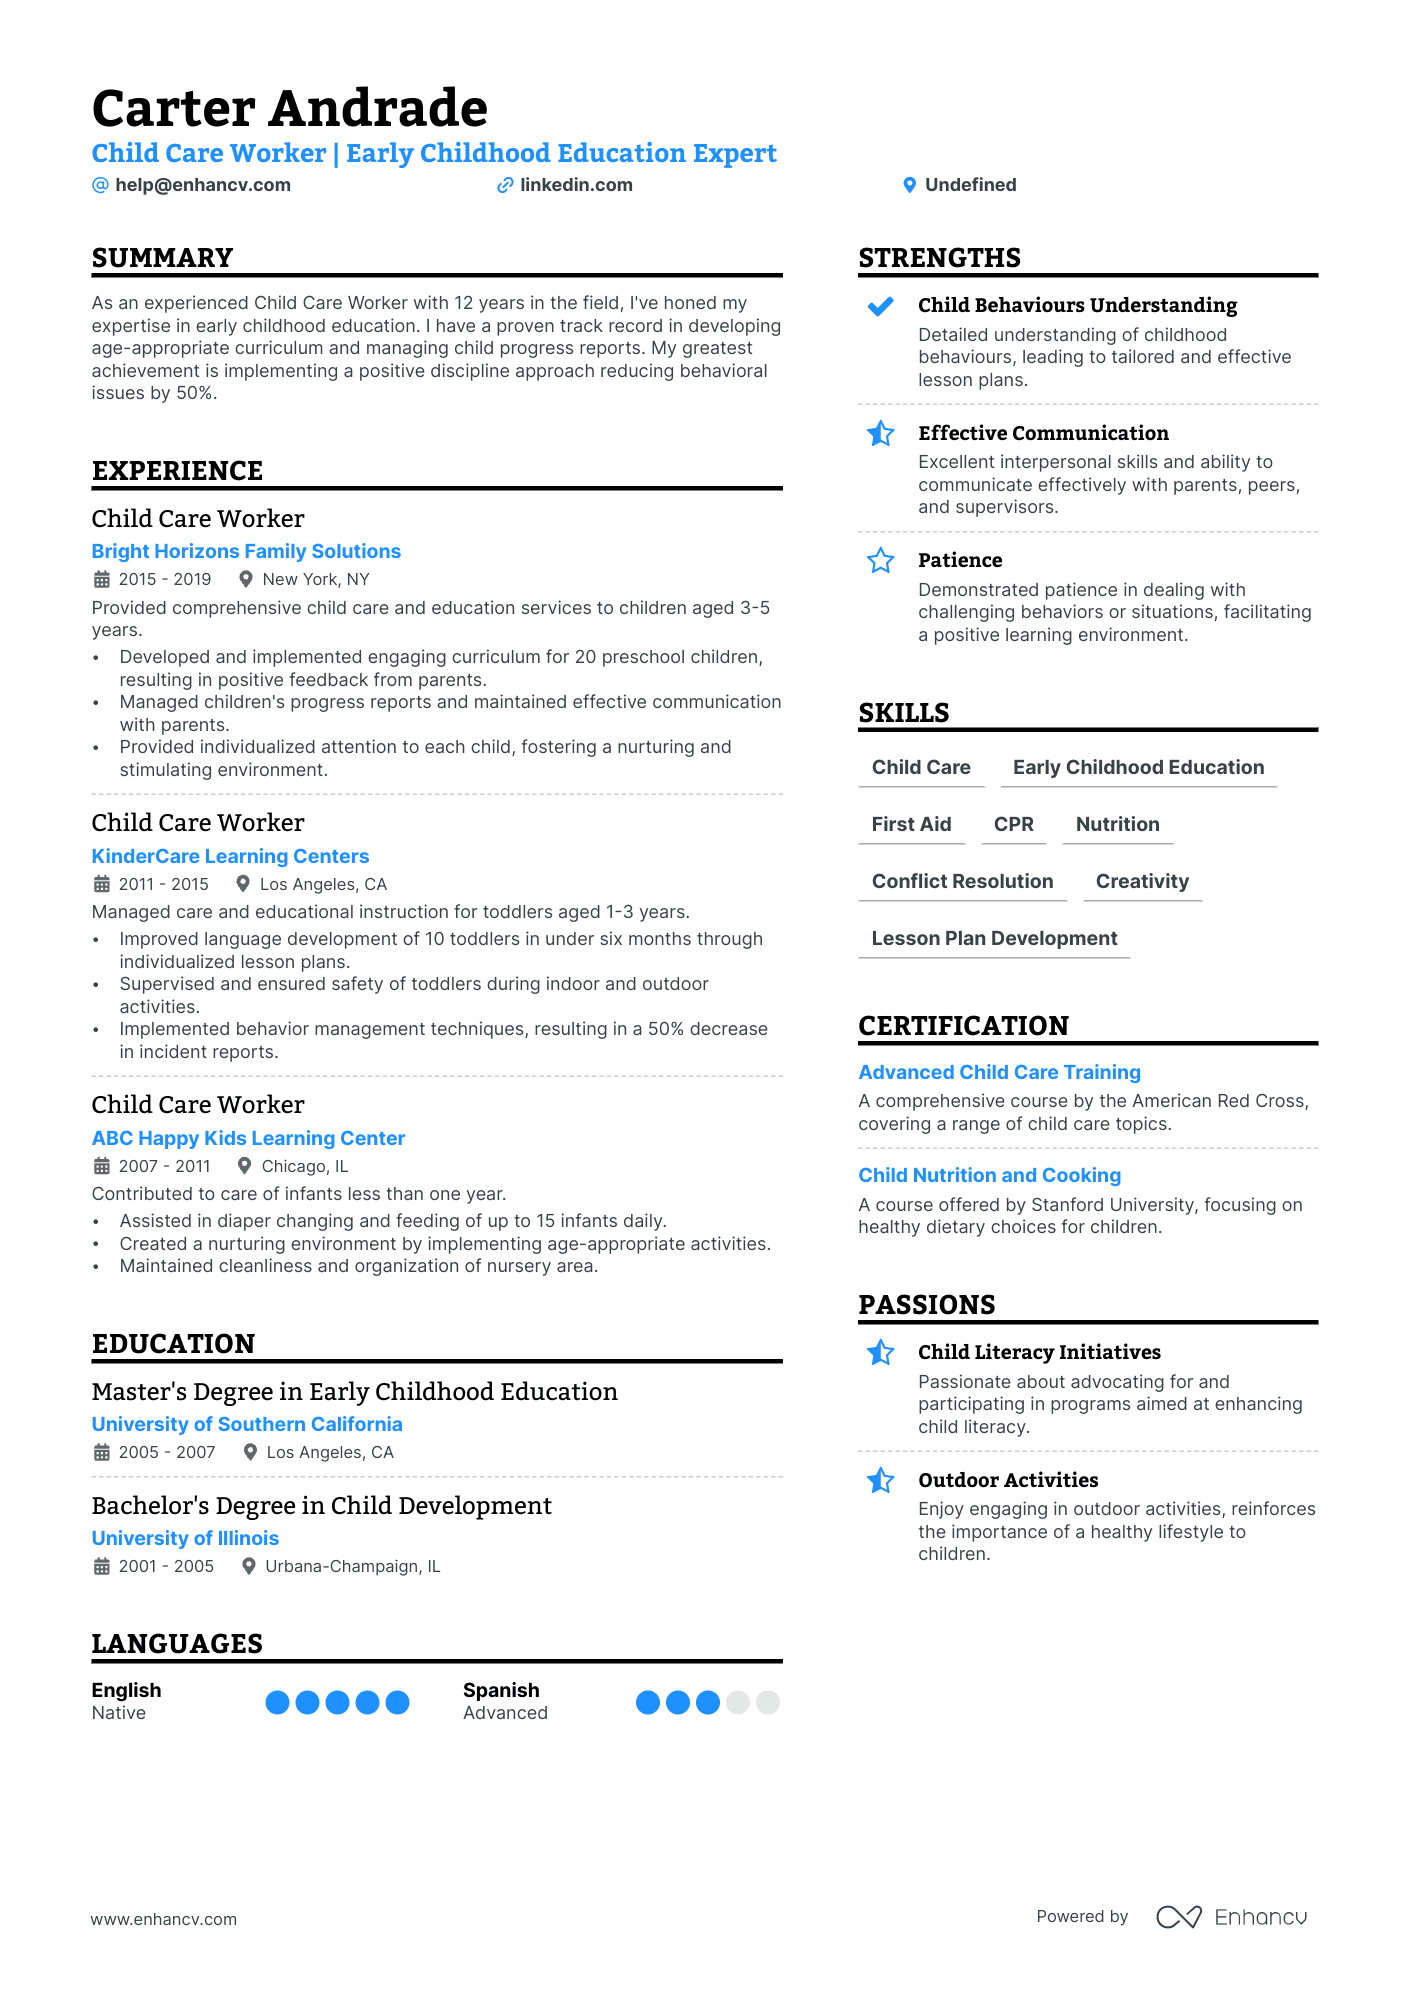 Child Care Worker resume example